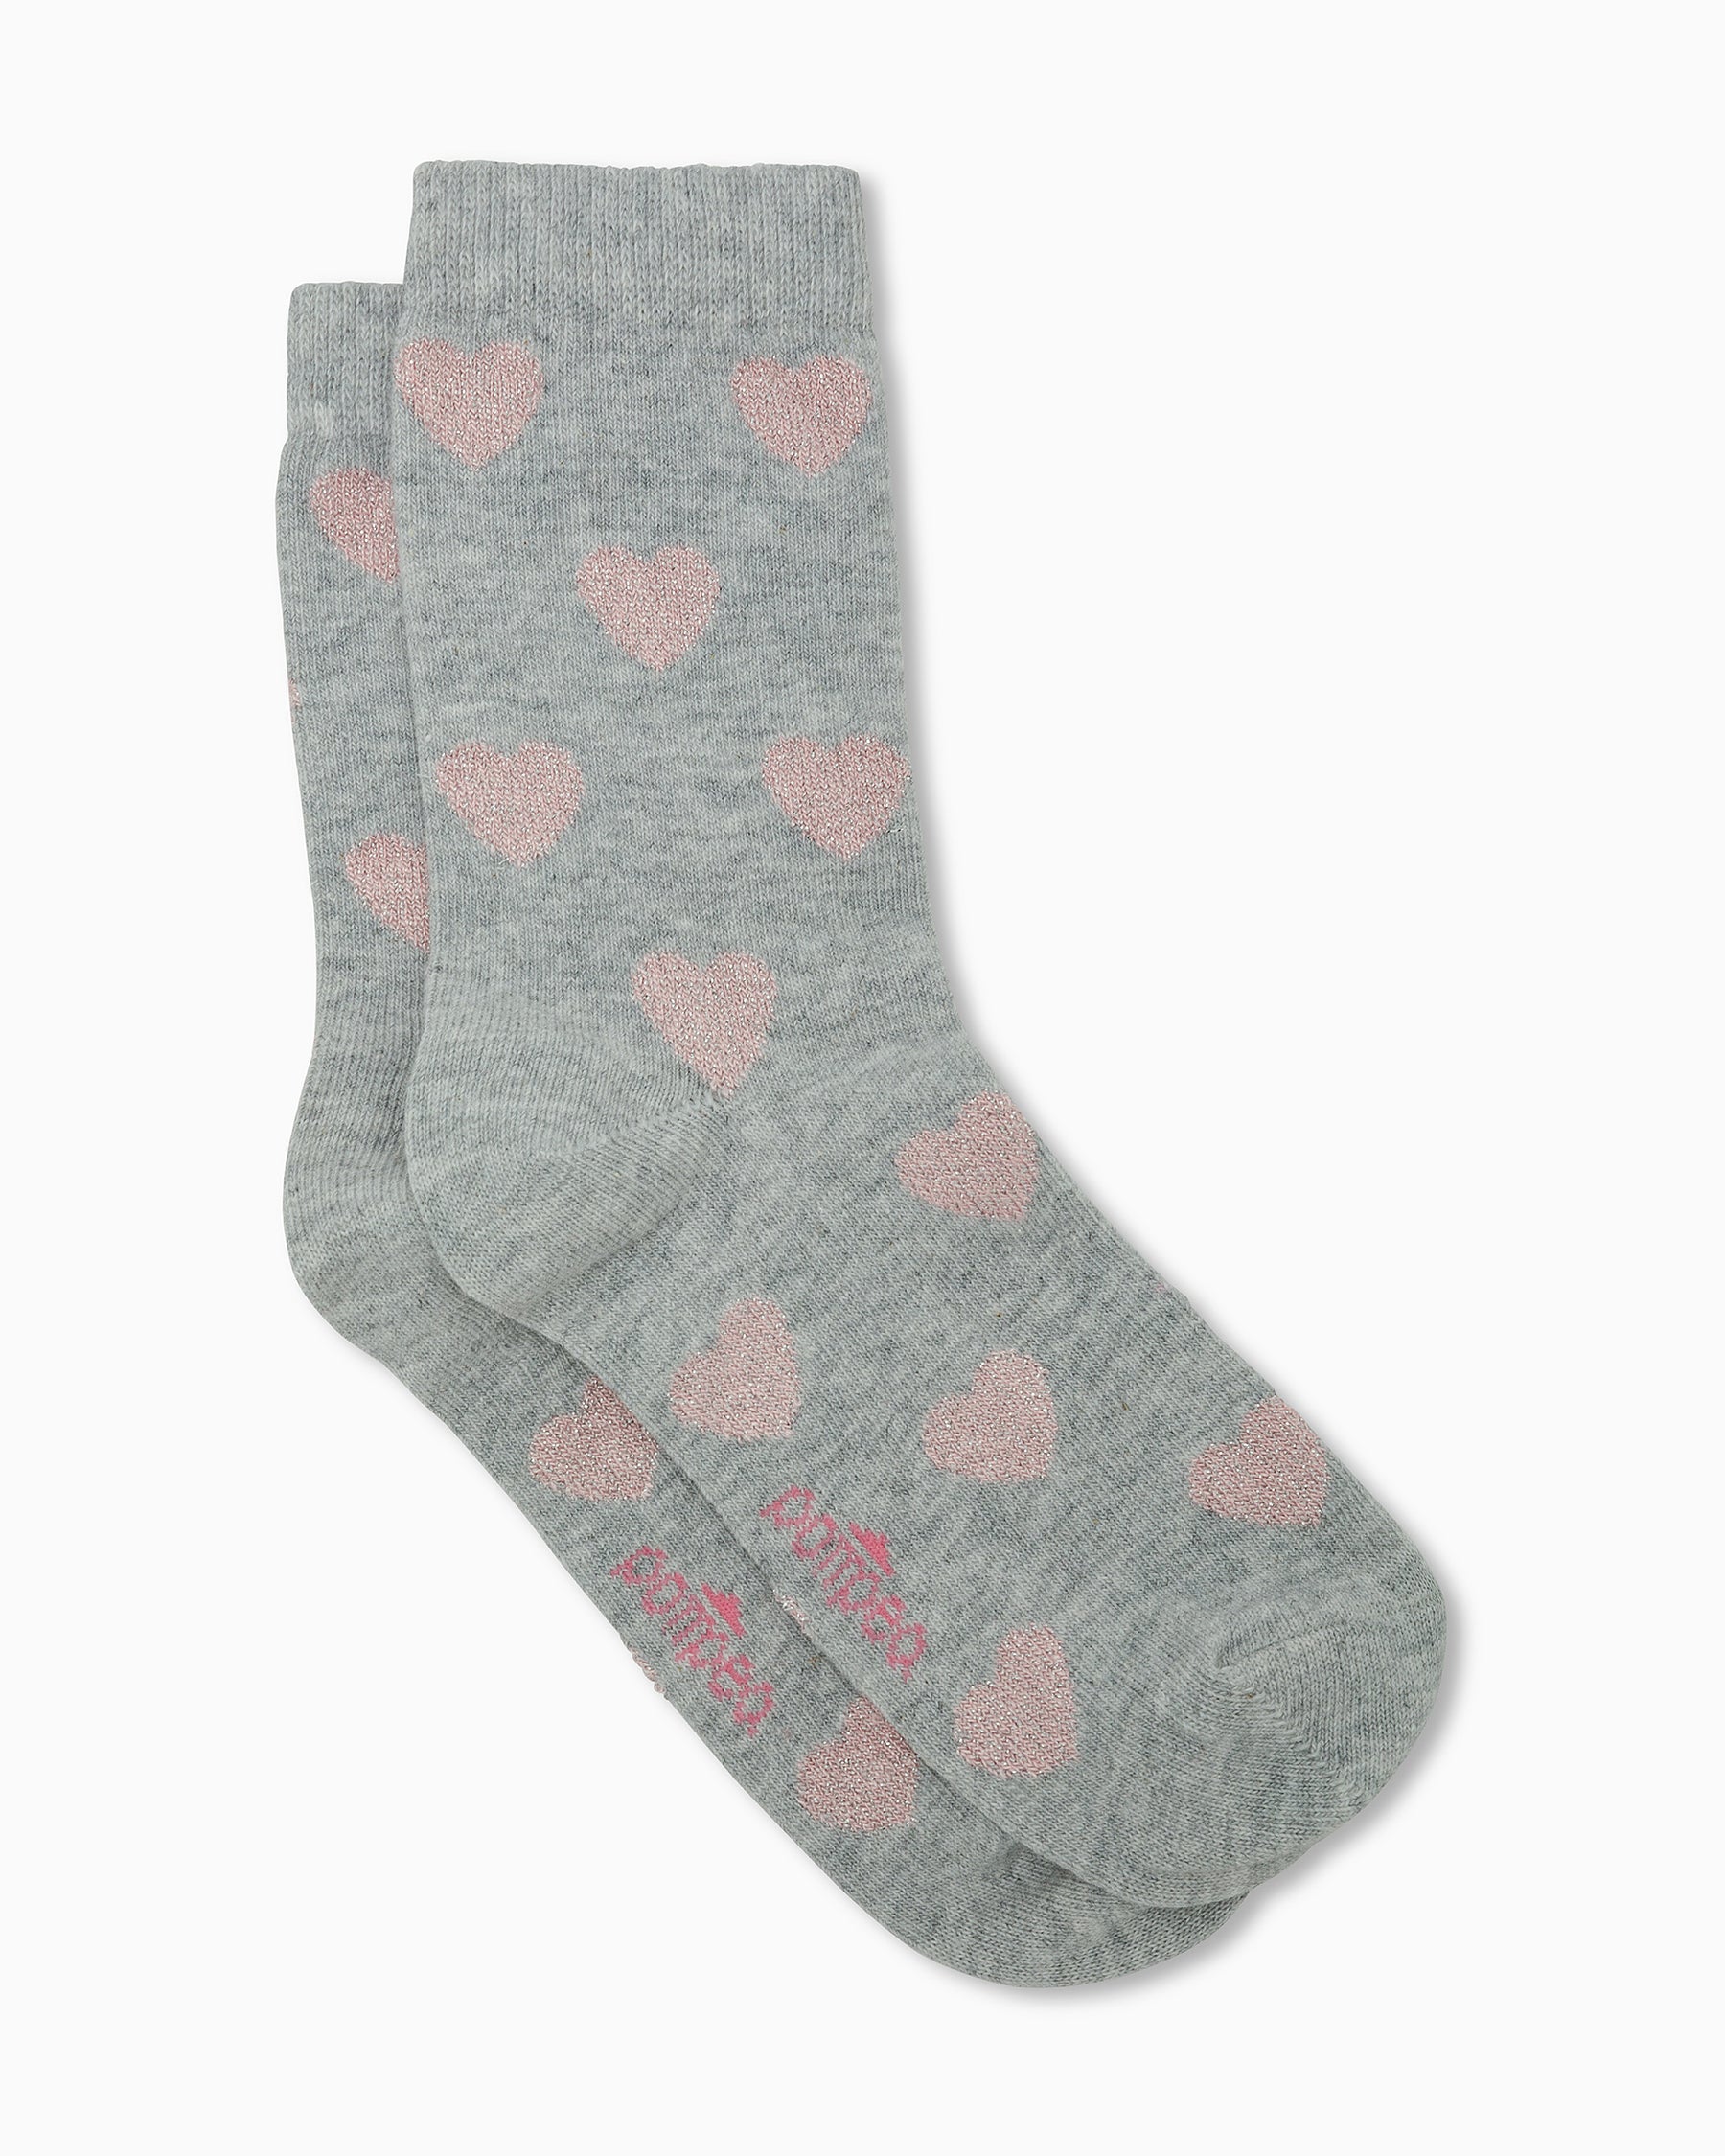 Erica girls’ sock with hearts